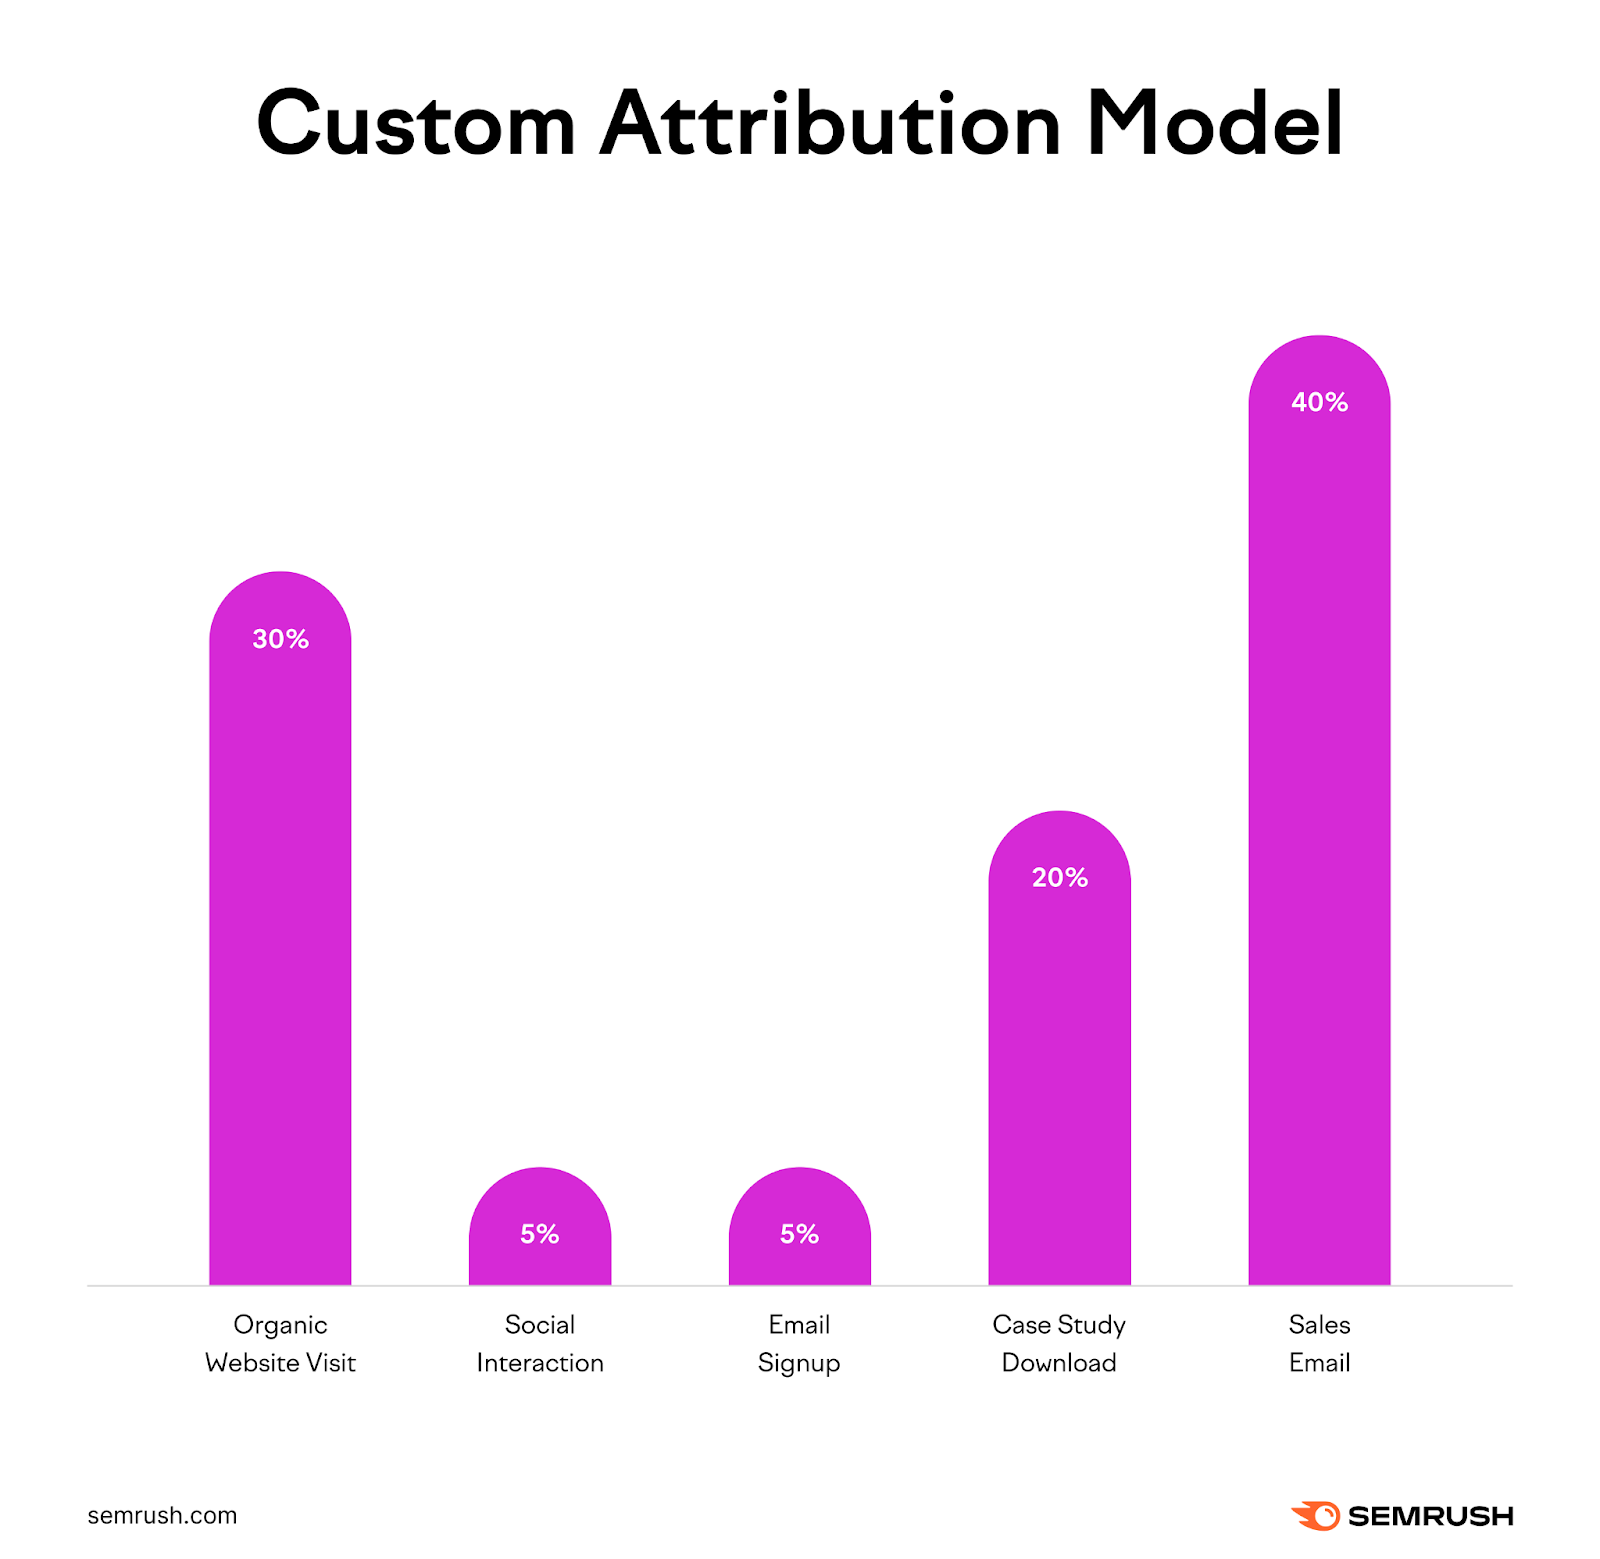 Custom attribution model with most of the weight placed on the first, fourth, and fifth touchpoints.